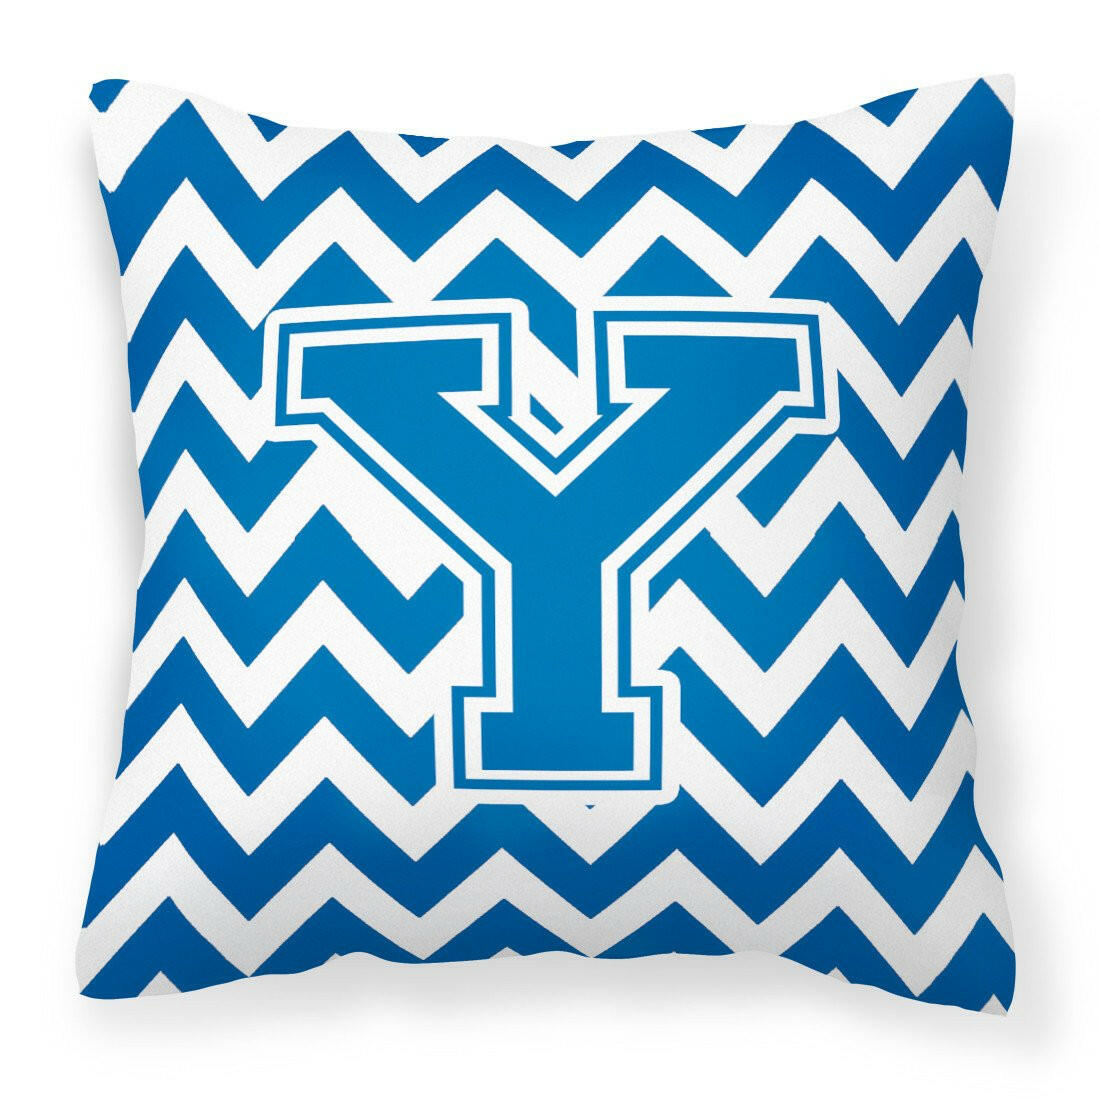 Letter Y Chevron Blue and White Fabric Decorative Pillow CJ1056-YPW1414 by Caroline's Treasures